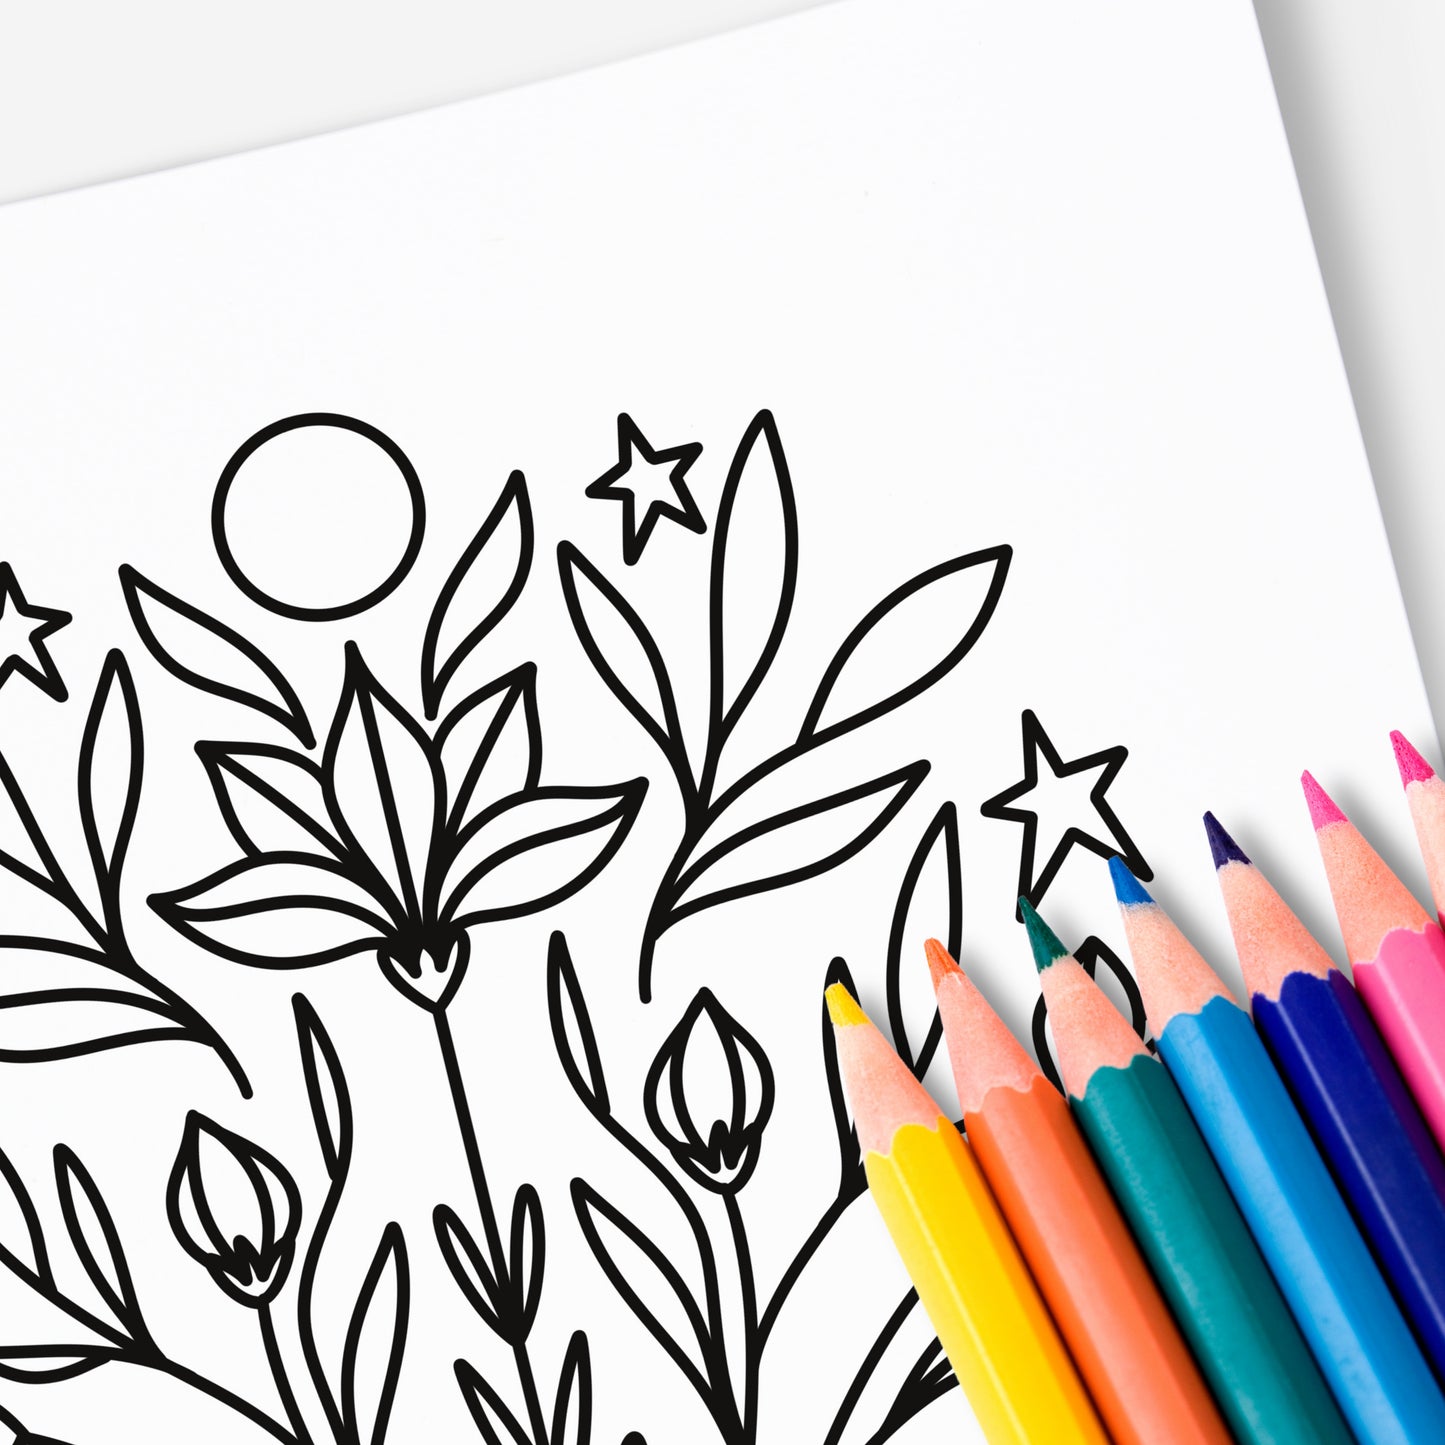 10 Pk Floral Printable Coloring Book 10Pk Coloring Pages | Hand-Drawn Flower Digital Coloring Book | Adult Zen Calming Color Activity Time